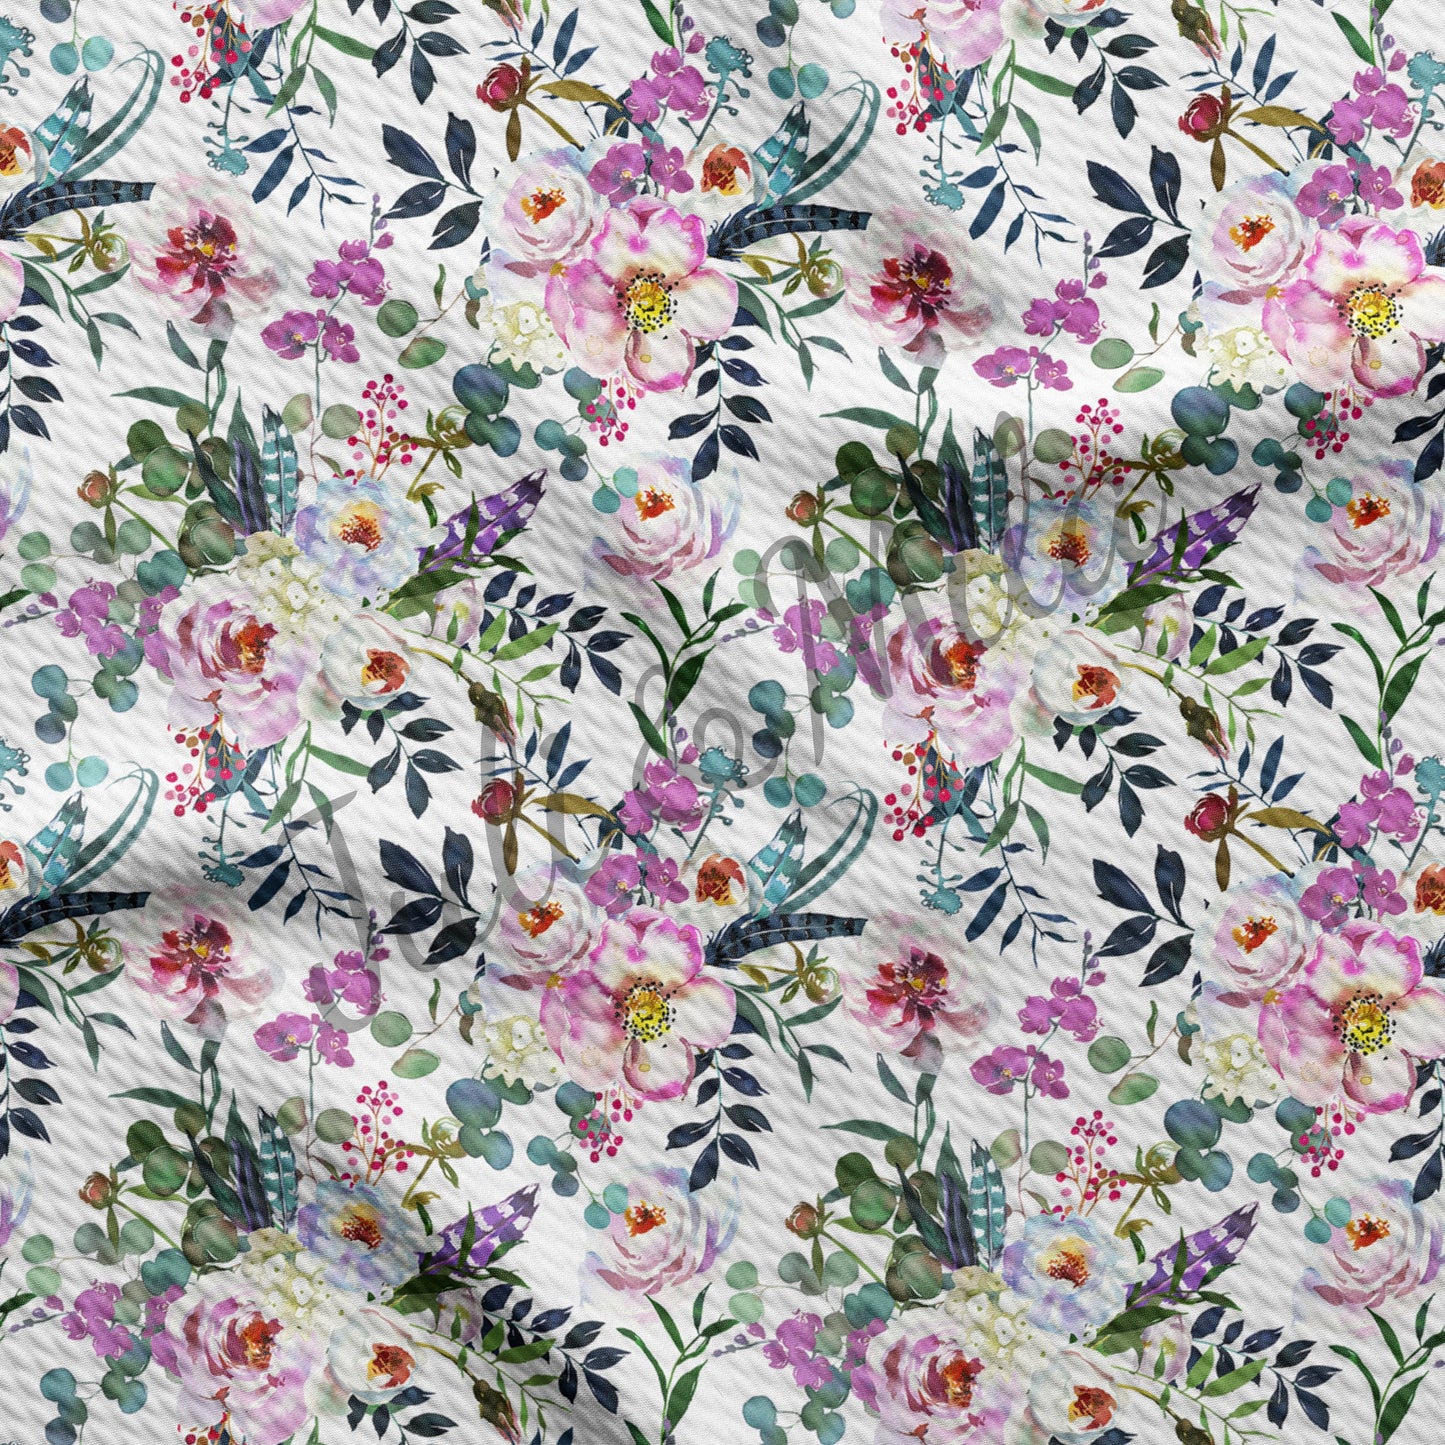 Floral Bullet Textured Fabric F25